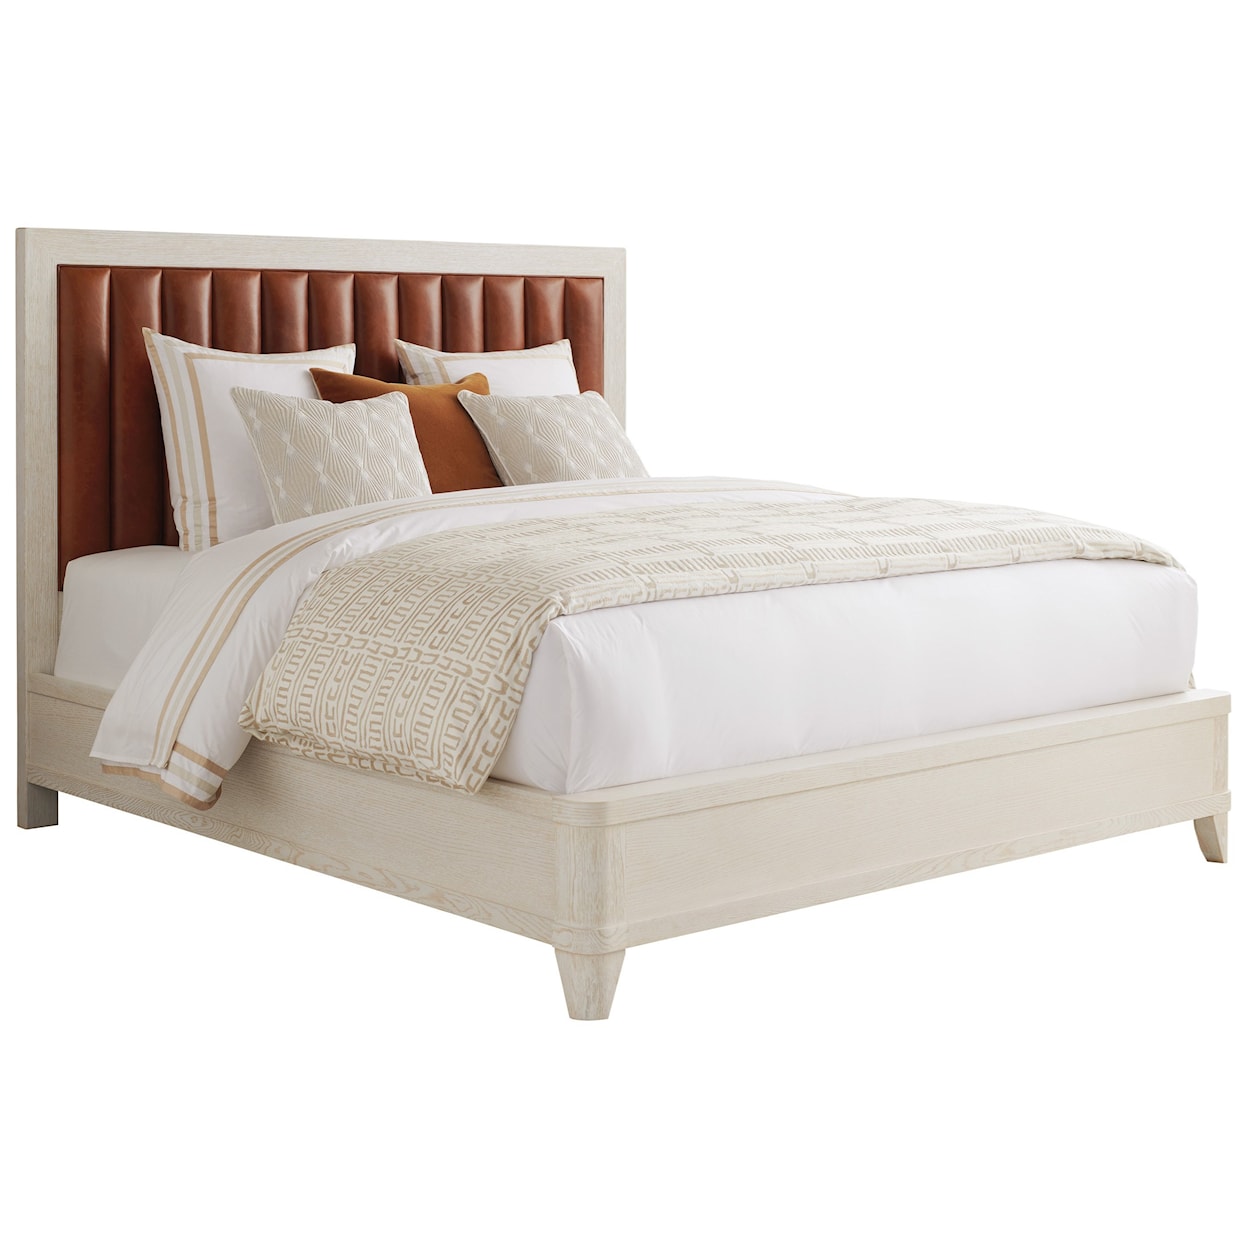 Barclay Butera Carmel Cambria Upholstered Bed 5/0 Queen